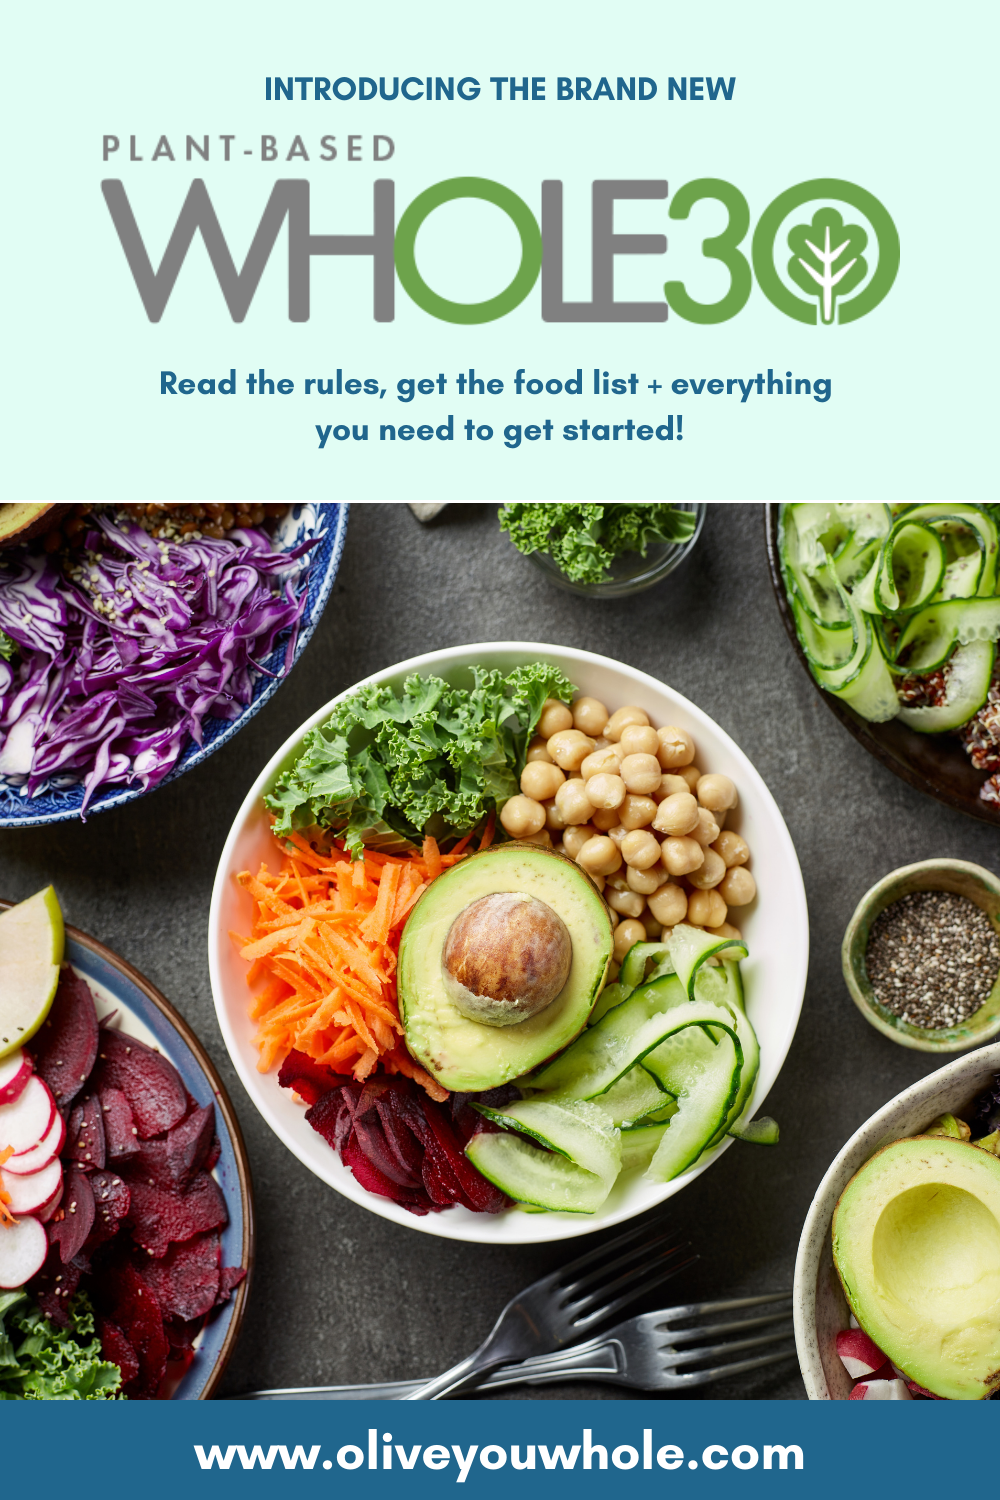 Free Plant-Based Whole30 Foods and Brands Guide - Olive You Whole